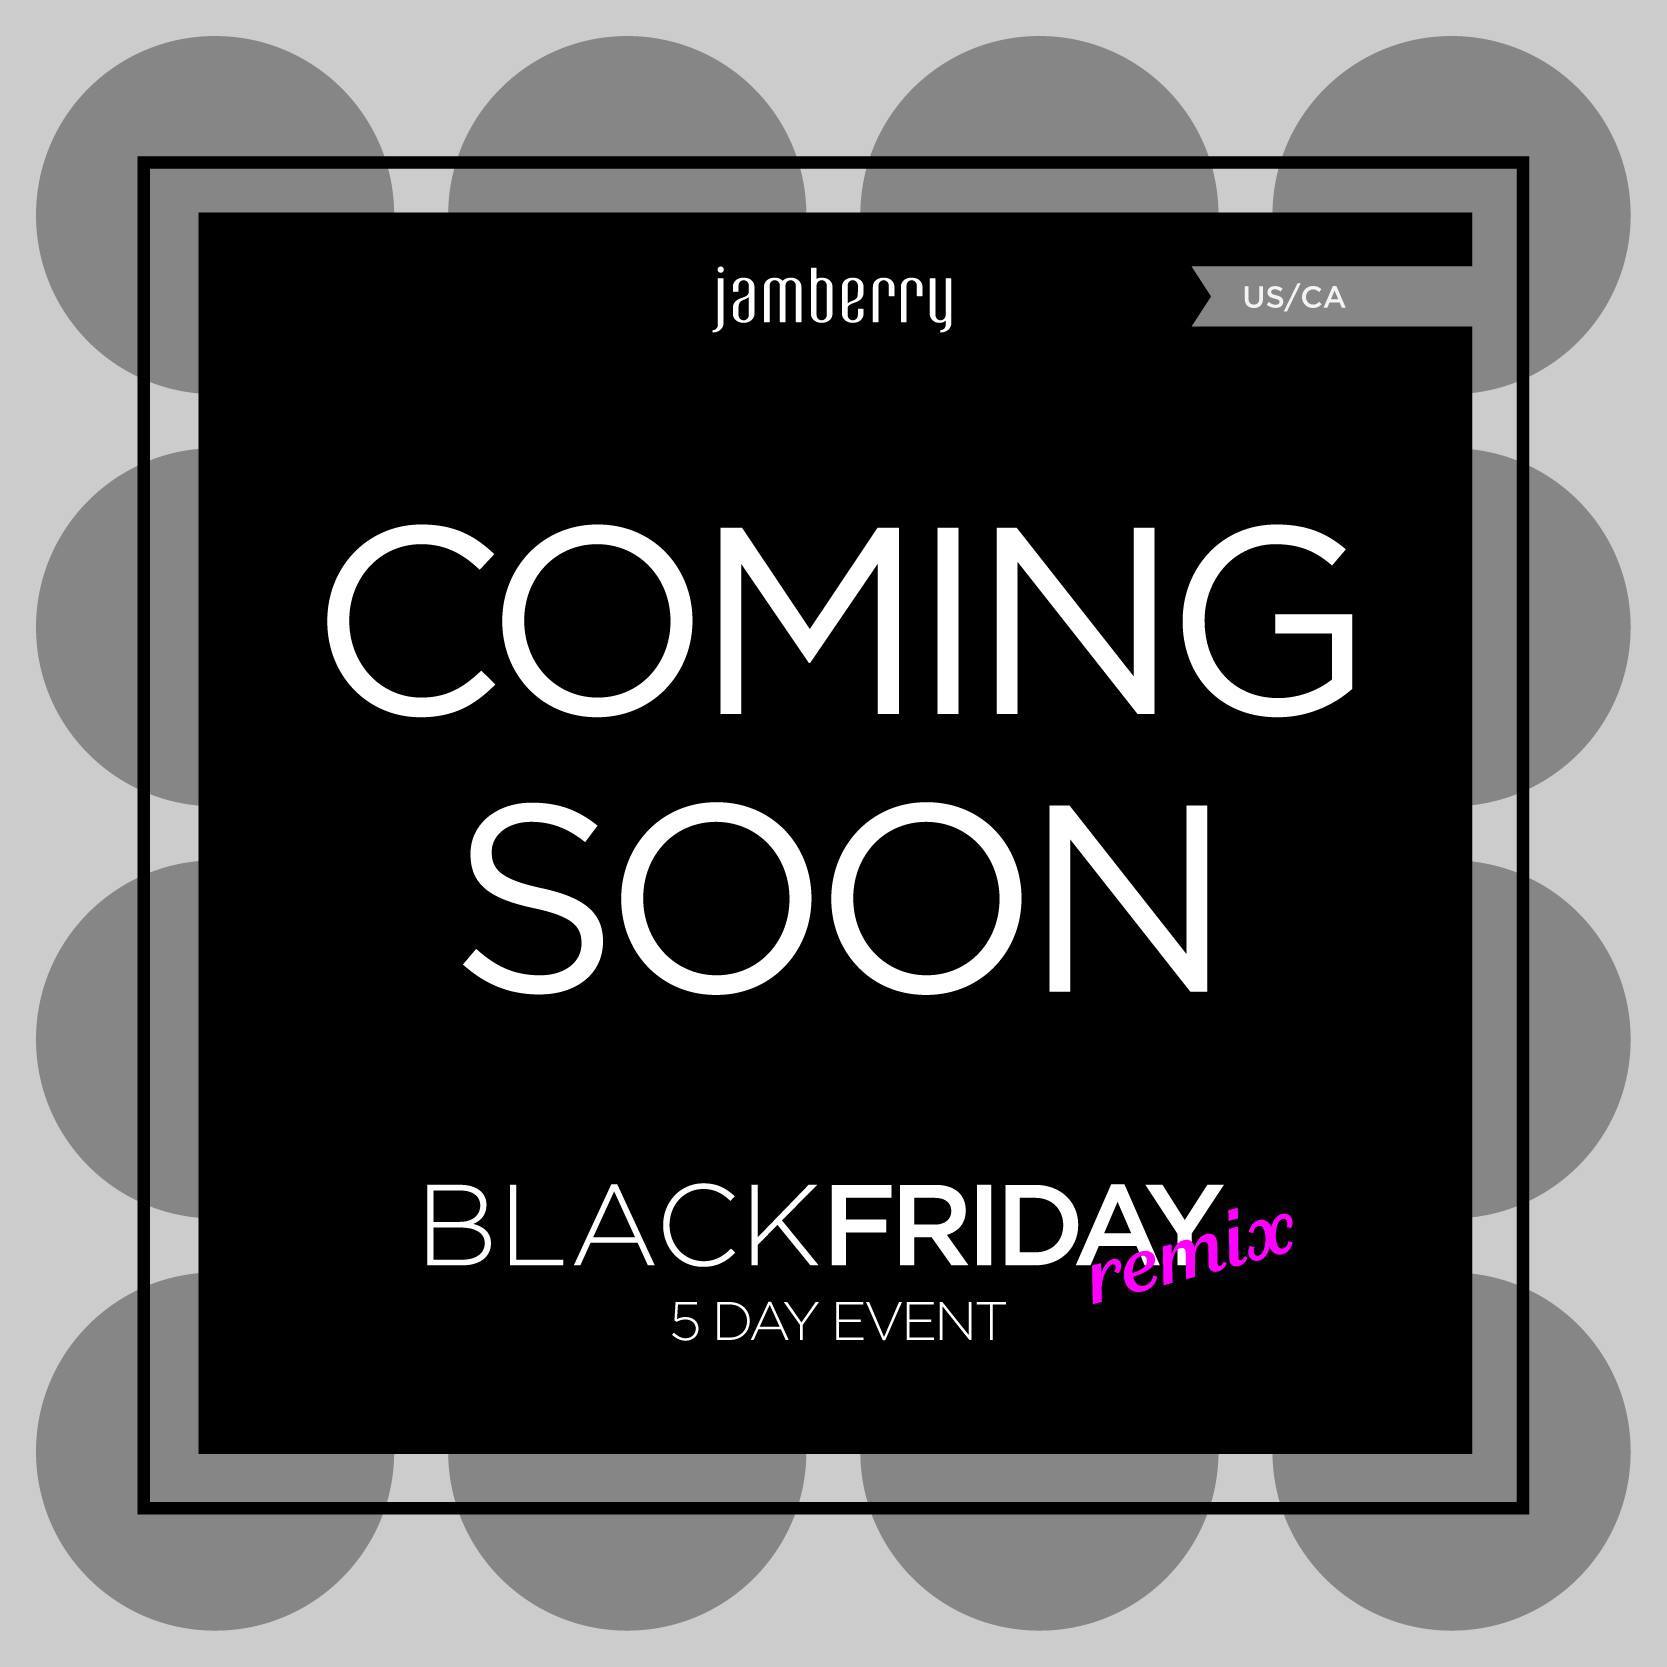 Jamberry Black and White Logo - Black Friday Specials & More Coming Soon! | Showynails Blog